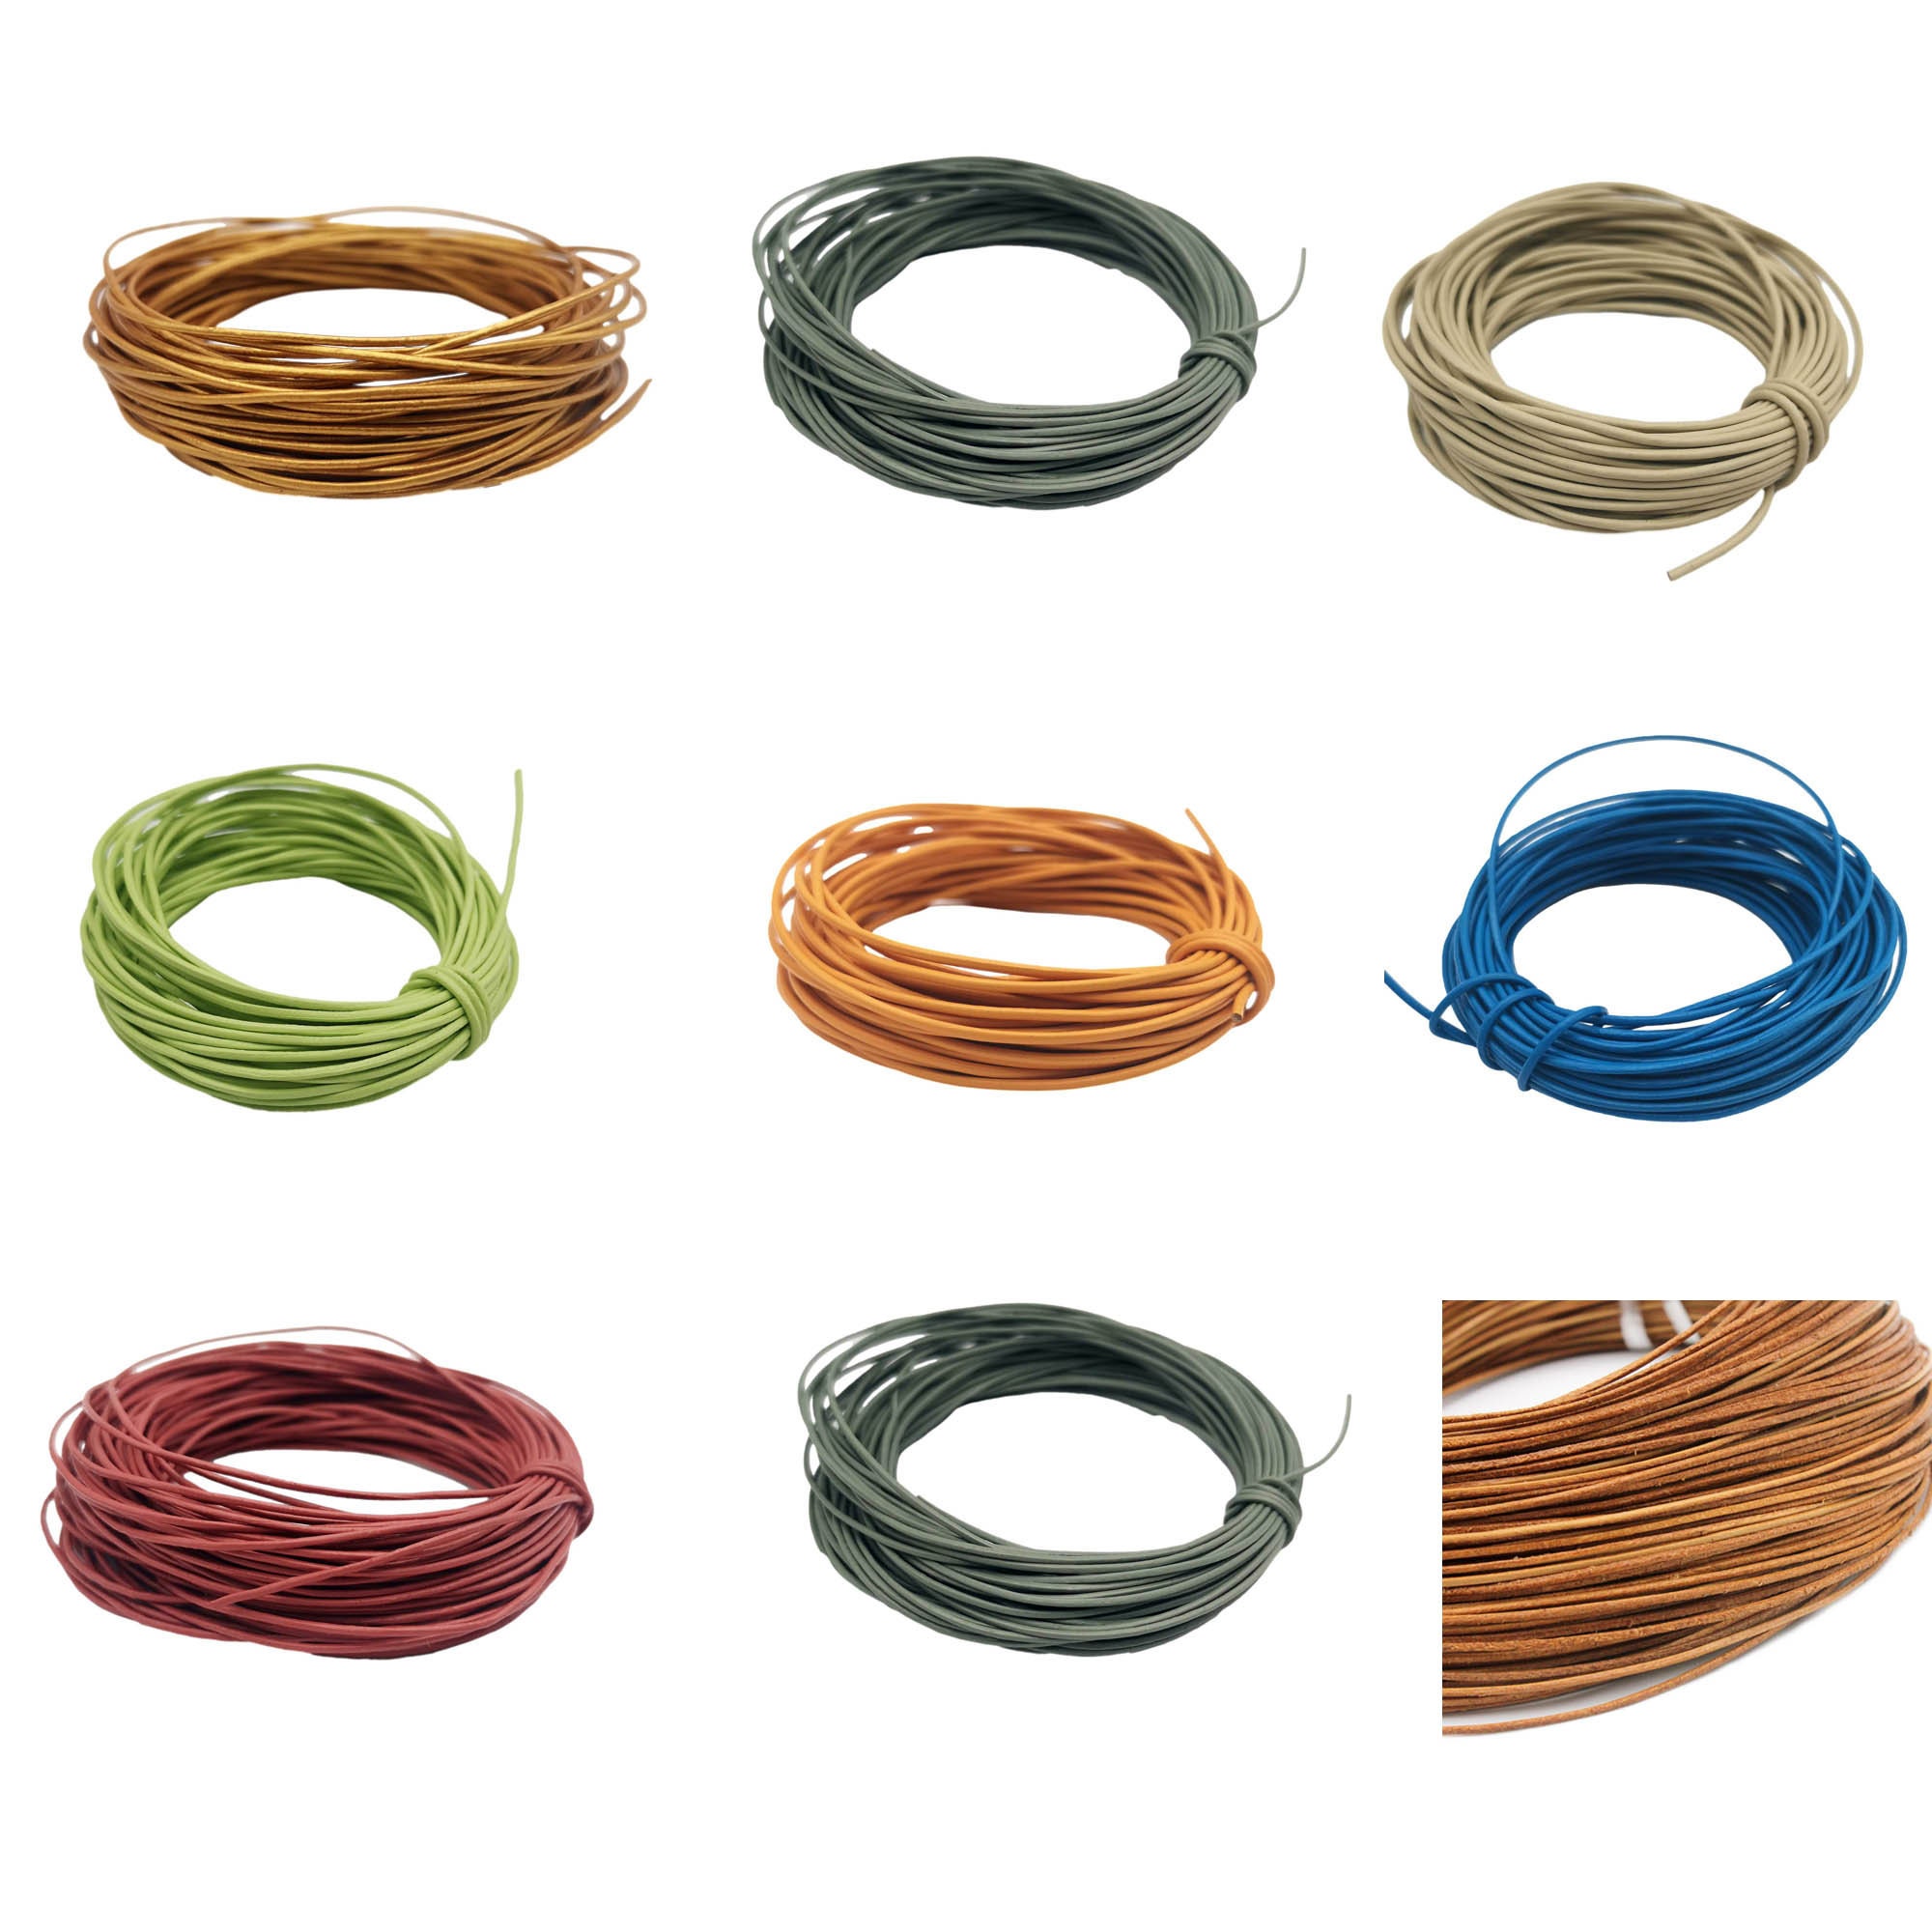 EXCEART 1 Roll Leather Roll Leather Flat Cord Thin Leather Strap Leather  Strips for Bracelets Leather Art Material Braided Belt Craft Leather Strap